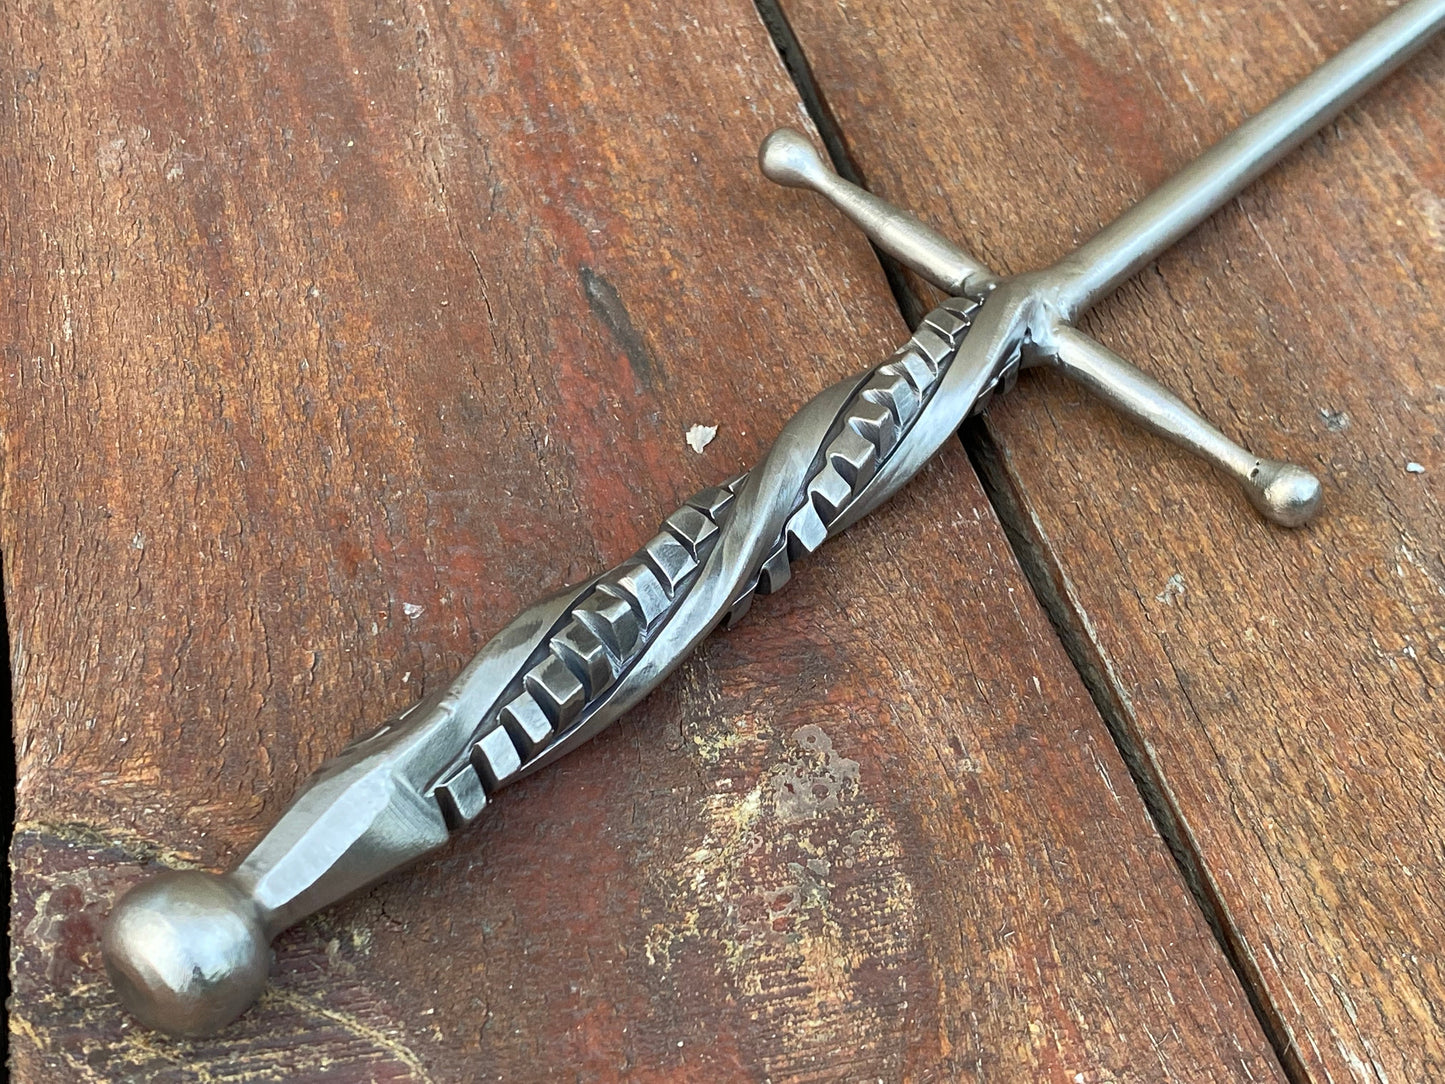 Custom listing: stainless steel fire poker, urgent order, shipped by UPS Express